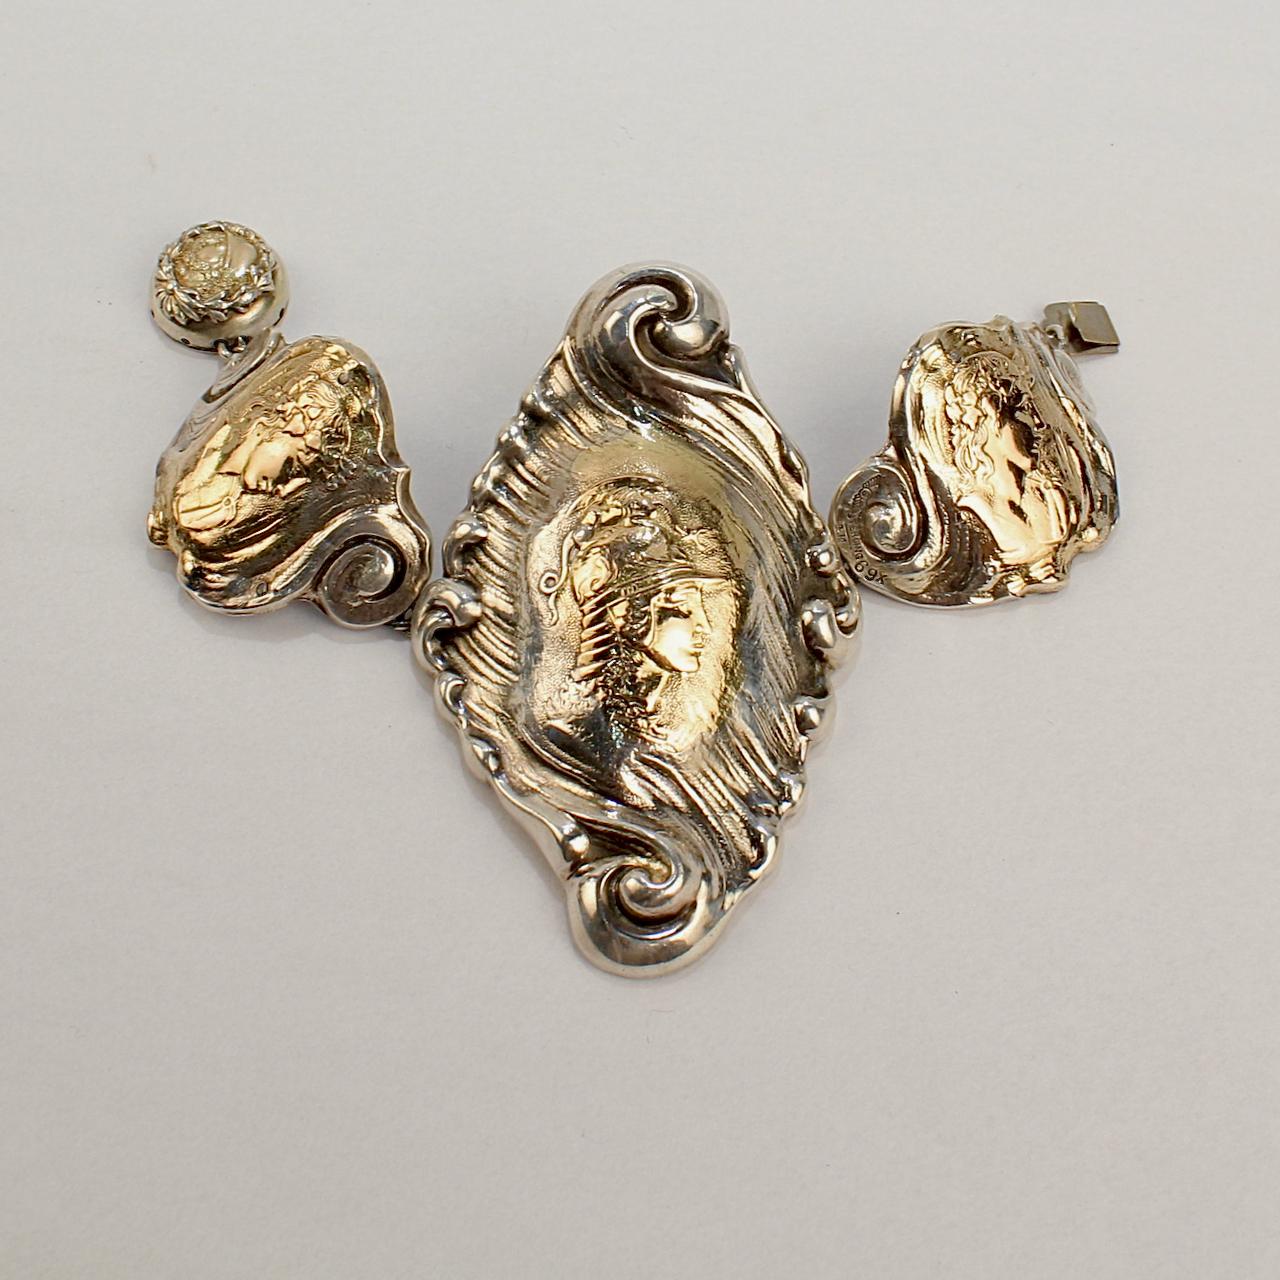 A very fine Shiebler sterling silver and 14k gold Etruscan or medallion bracelet.

The bracelet appears to be comprised of Shiebler buckle and button elements that were fashioned with a chain into a bracelet by a jeweler. 

Consisting of 4 separate